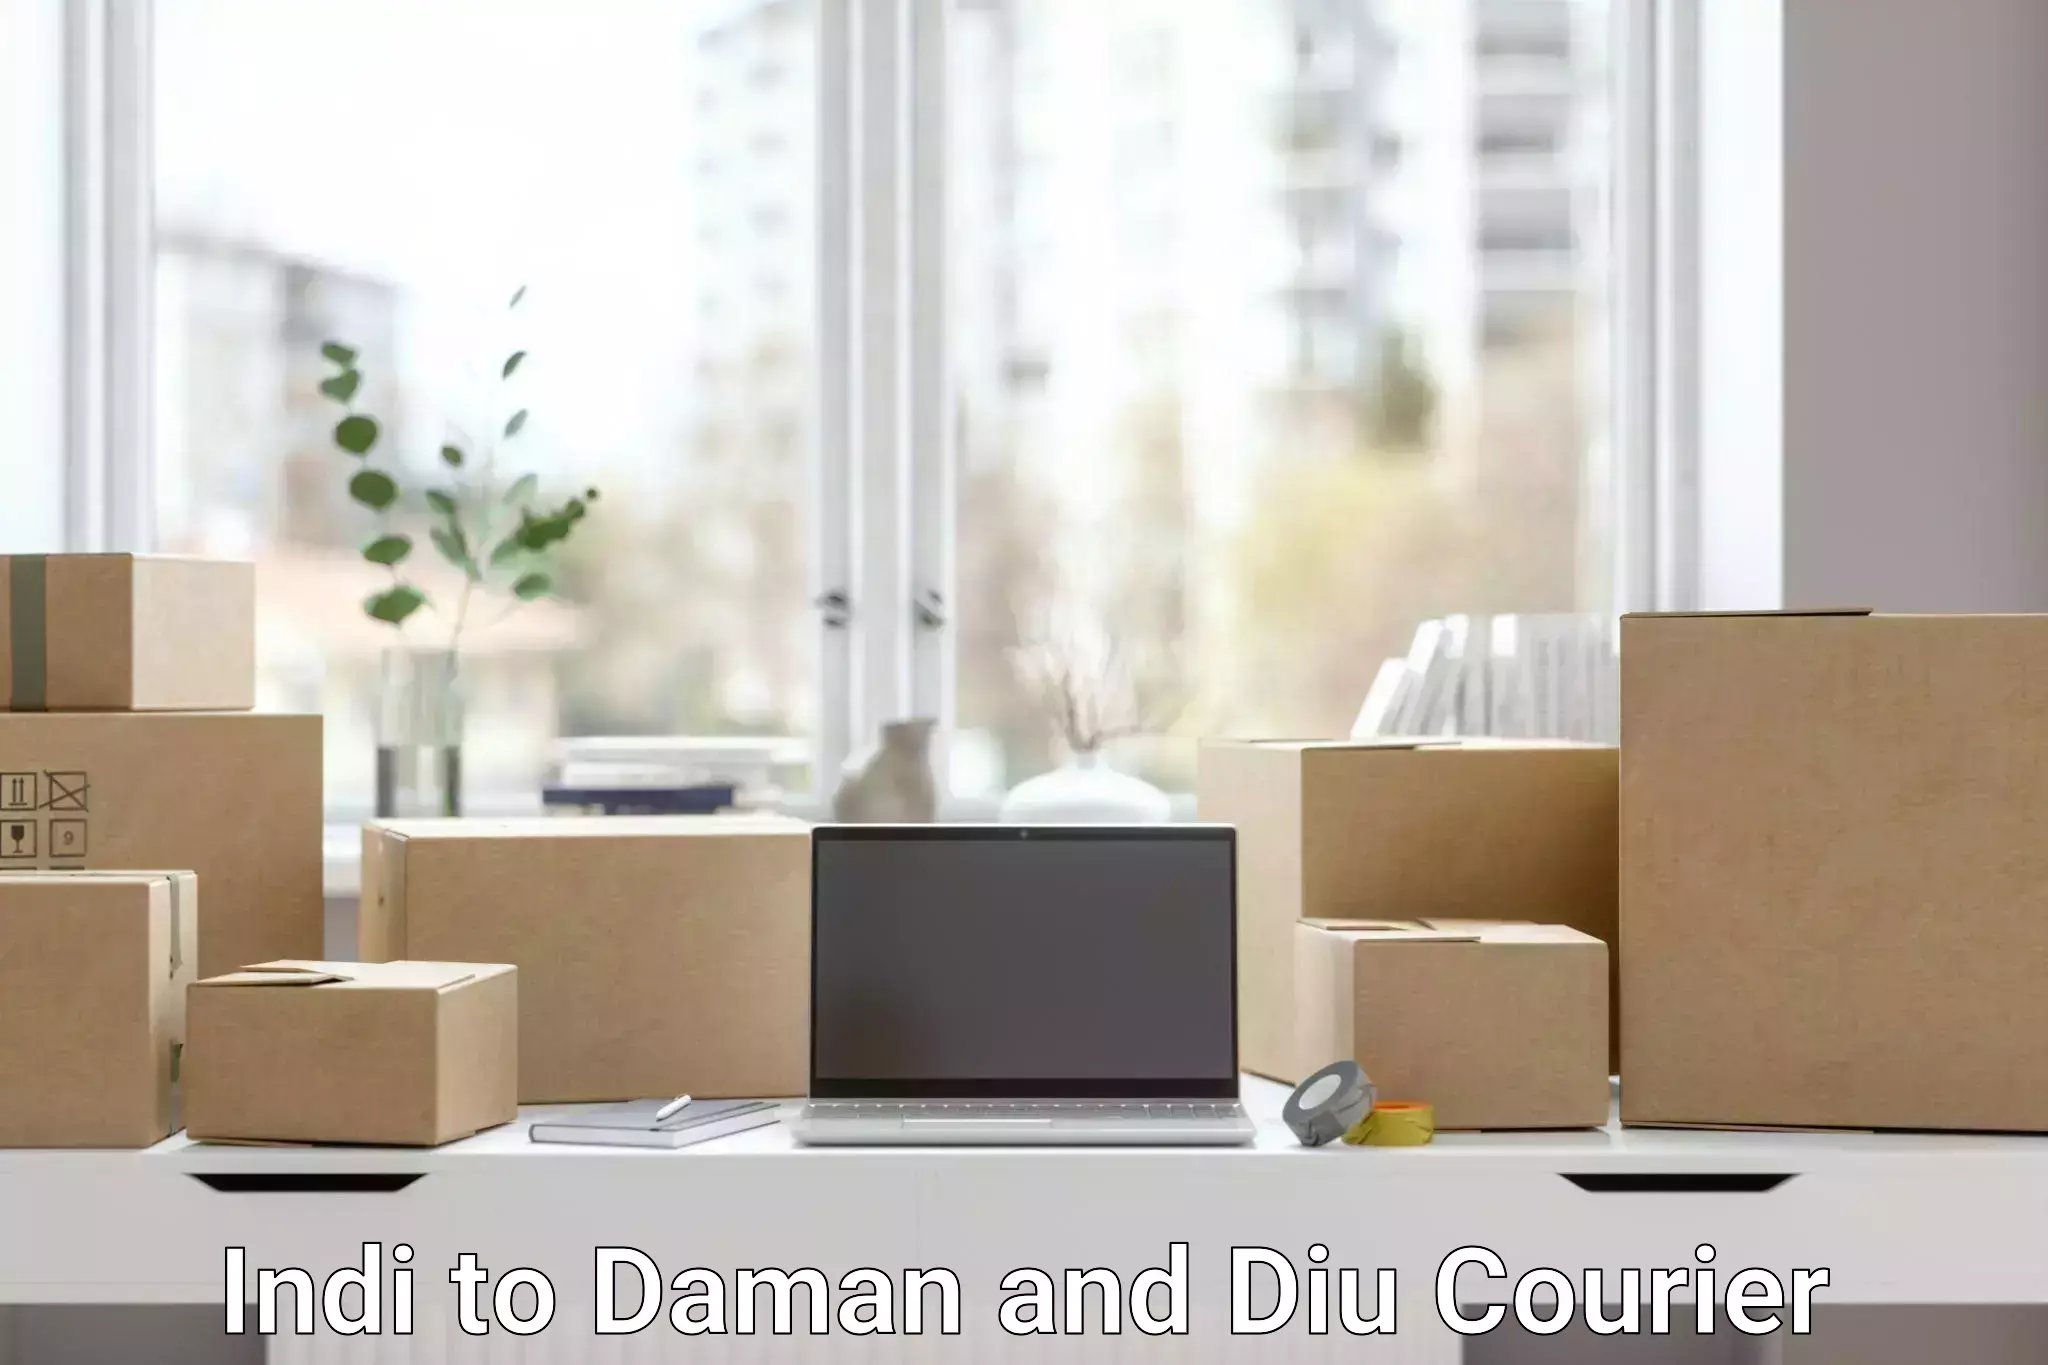 Flexible delivery scheduling in Indi to Daman